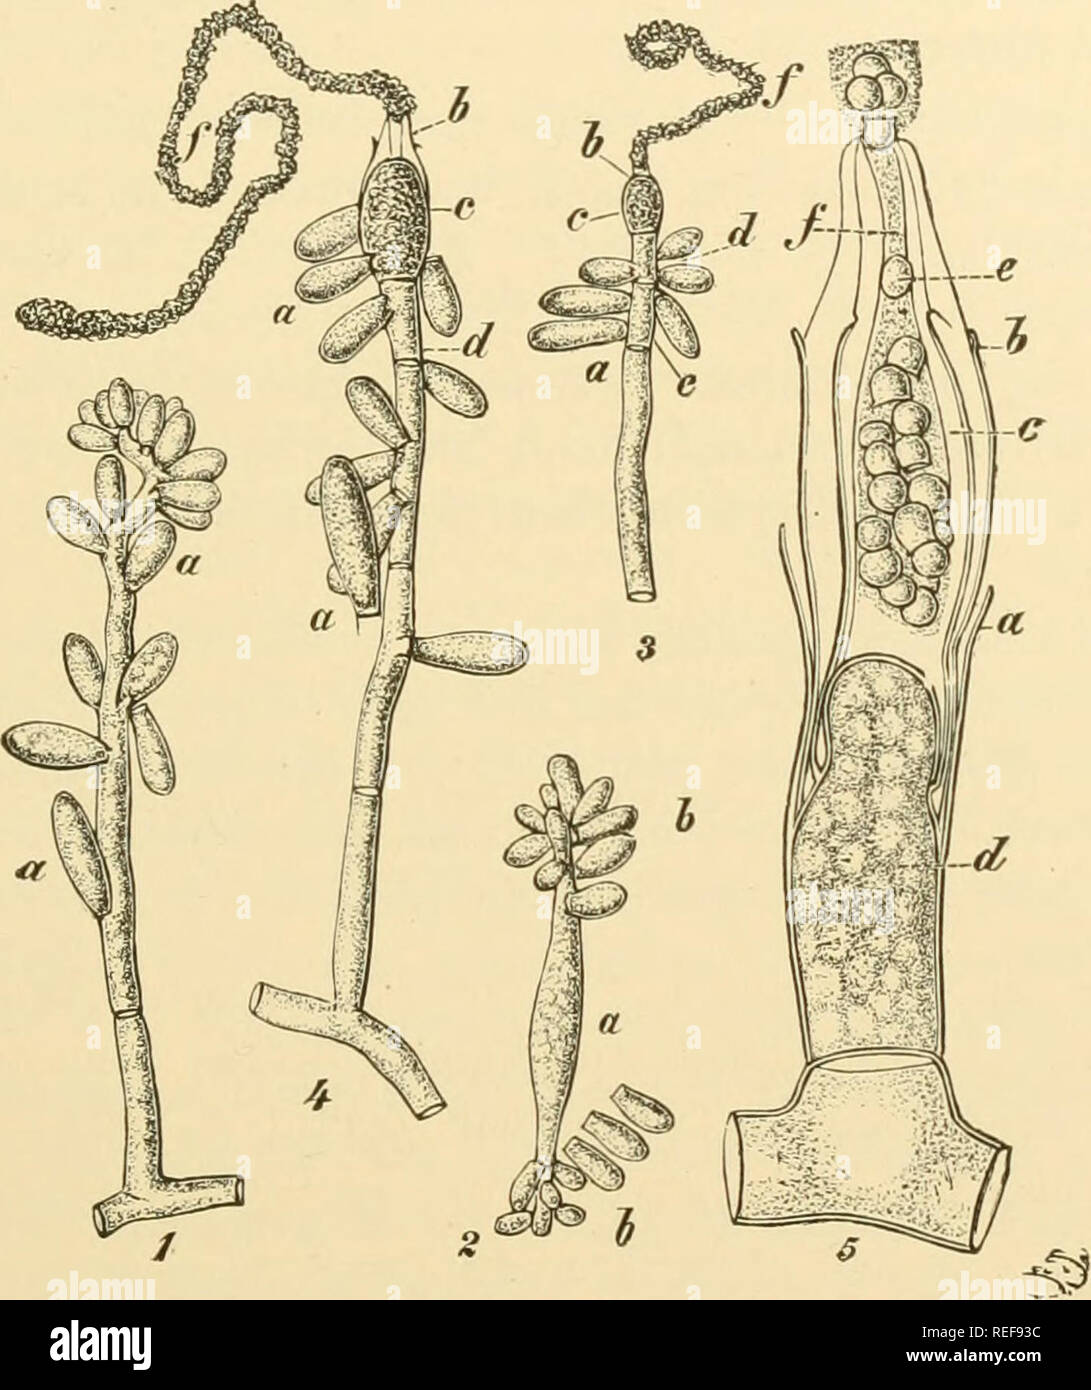 . Comparative morphology of Fungi. Fungi. HEMIASCOM YCETES 147 whose membrane is hyaline in youth, but appears brownish in age. Hyphal ends swell to conidia. Lateral outgrowths of hyphae form new conidia which push aside the previous ones so that finally a tuft of as many as 30 conidia is formed (Fig. 91, 1). The conidia are quite variable in size; in general the earlier ones are larger than the later. They germi- nate with germ tubes which, with liberal nourishment, grow into mycelia or, with poor nourishment, form new conidia (Fig. 91, 2.). After a time, the conidia are gradually replaced by Stock Photo